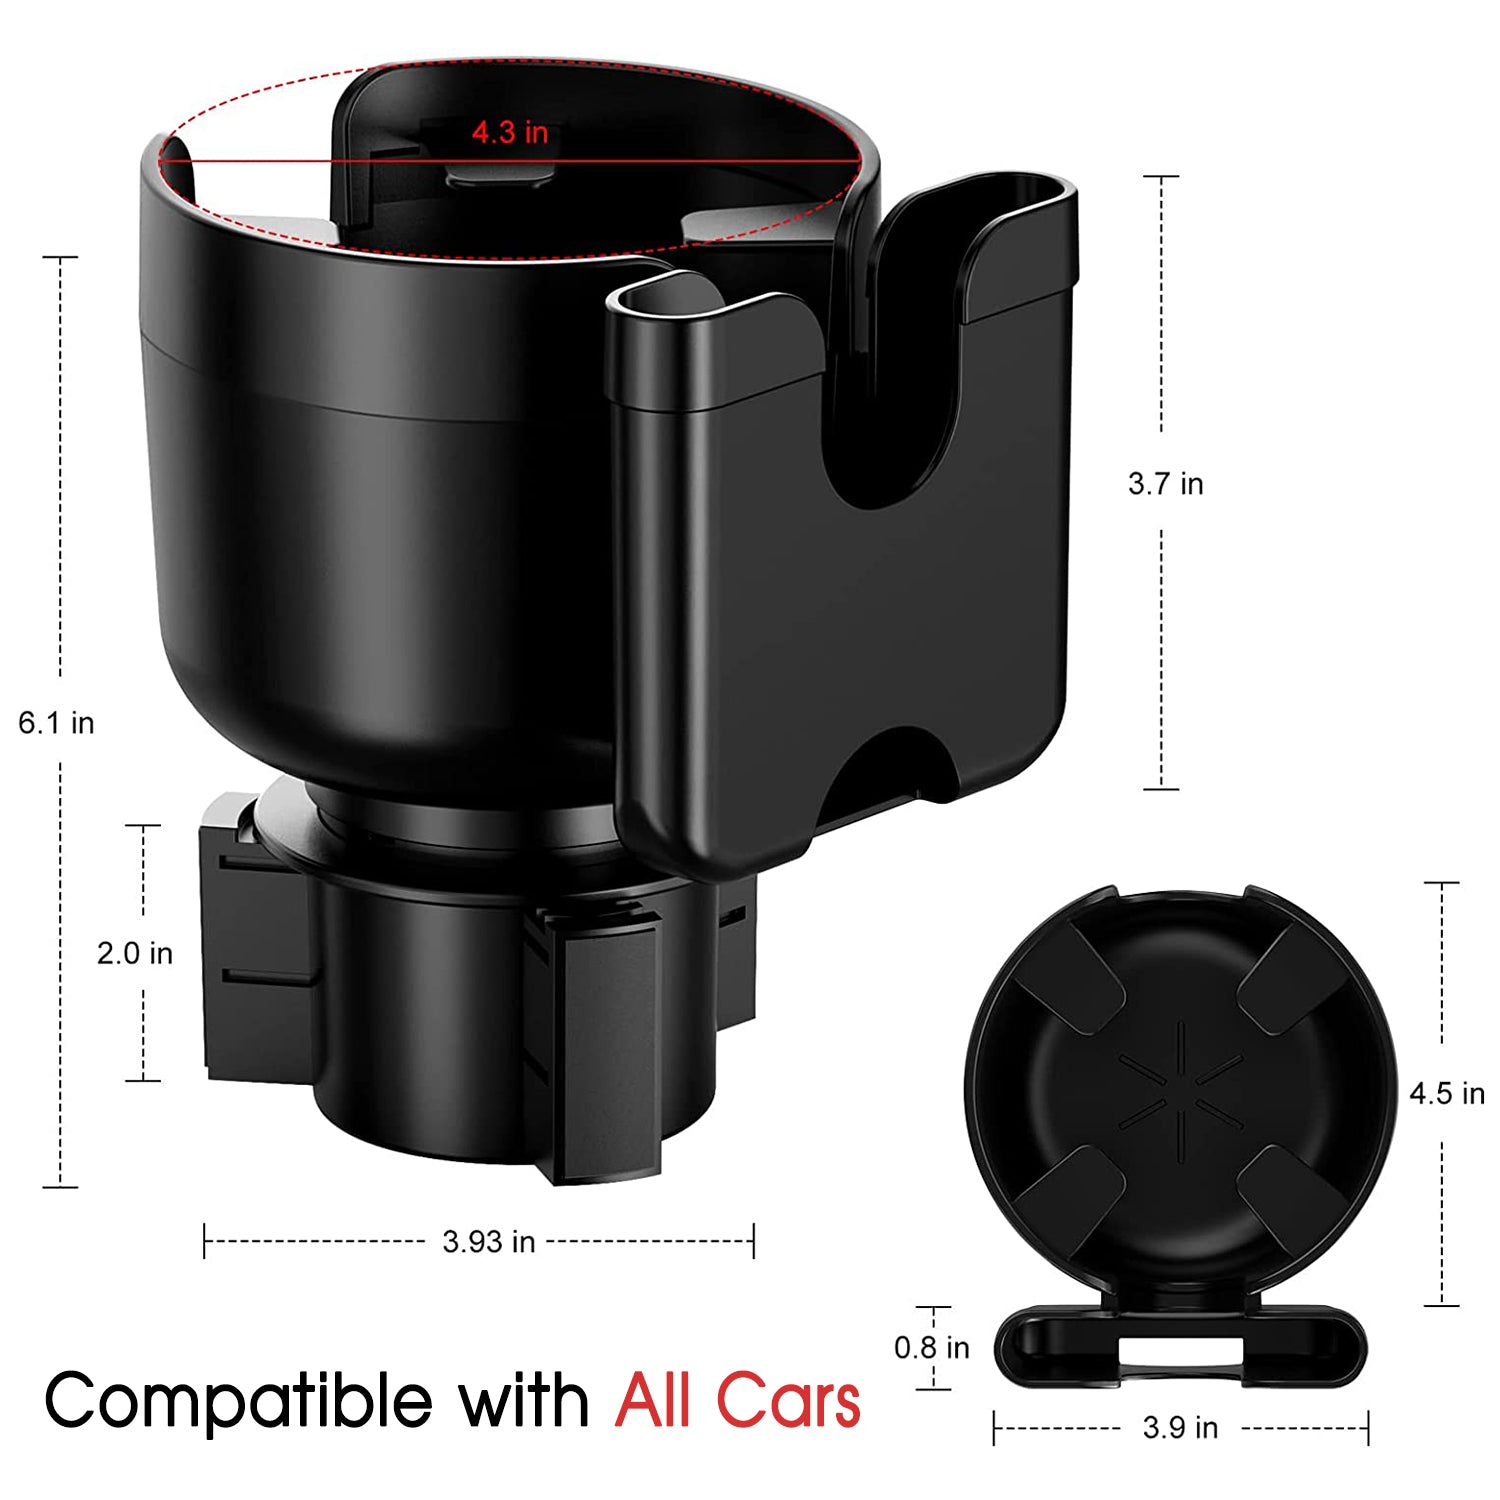 Custom Text For Car Cup Holder 2-in-1, Custom For Your Cars, Car Cup Holder Expander Adapter with Adjustable Base, Car Cup Holder Expander Organizer with Phone Holder DA15988